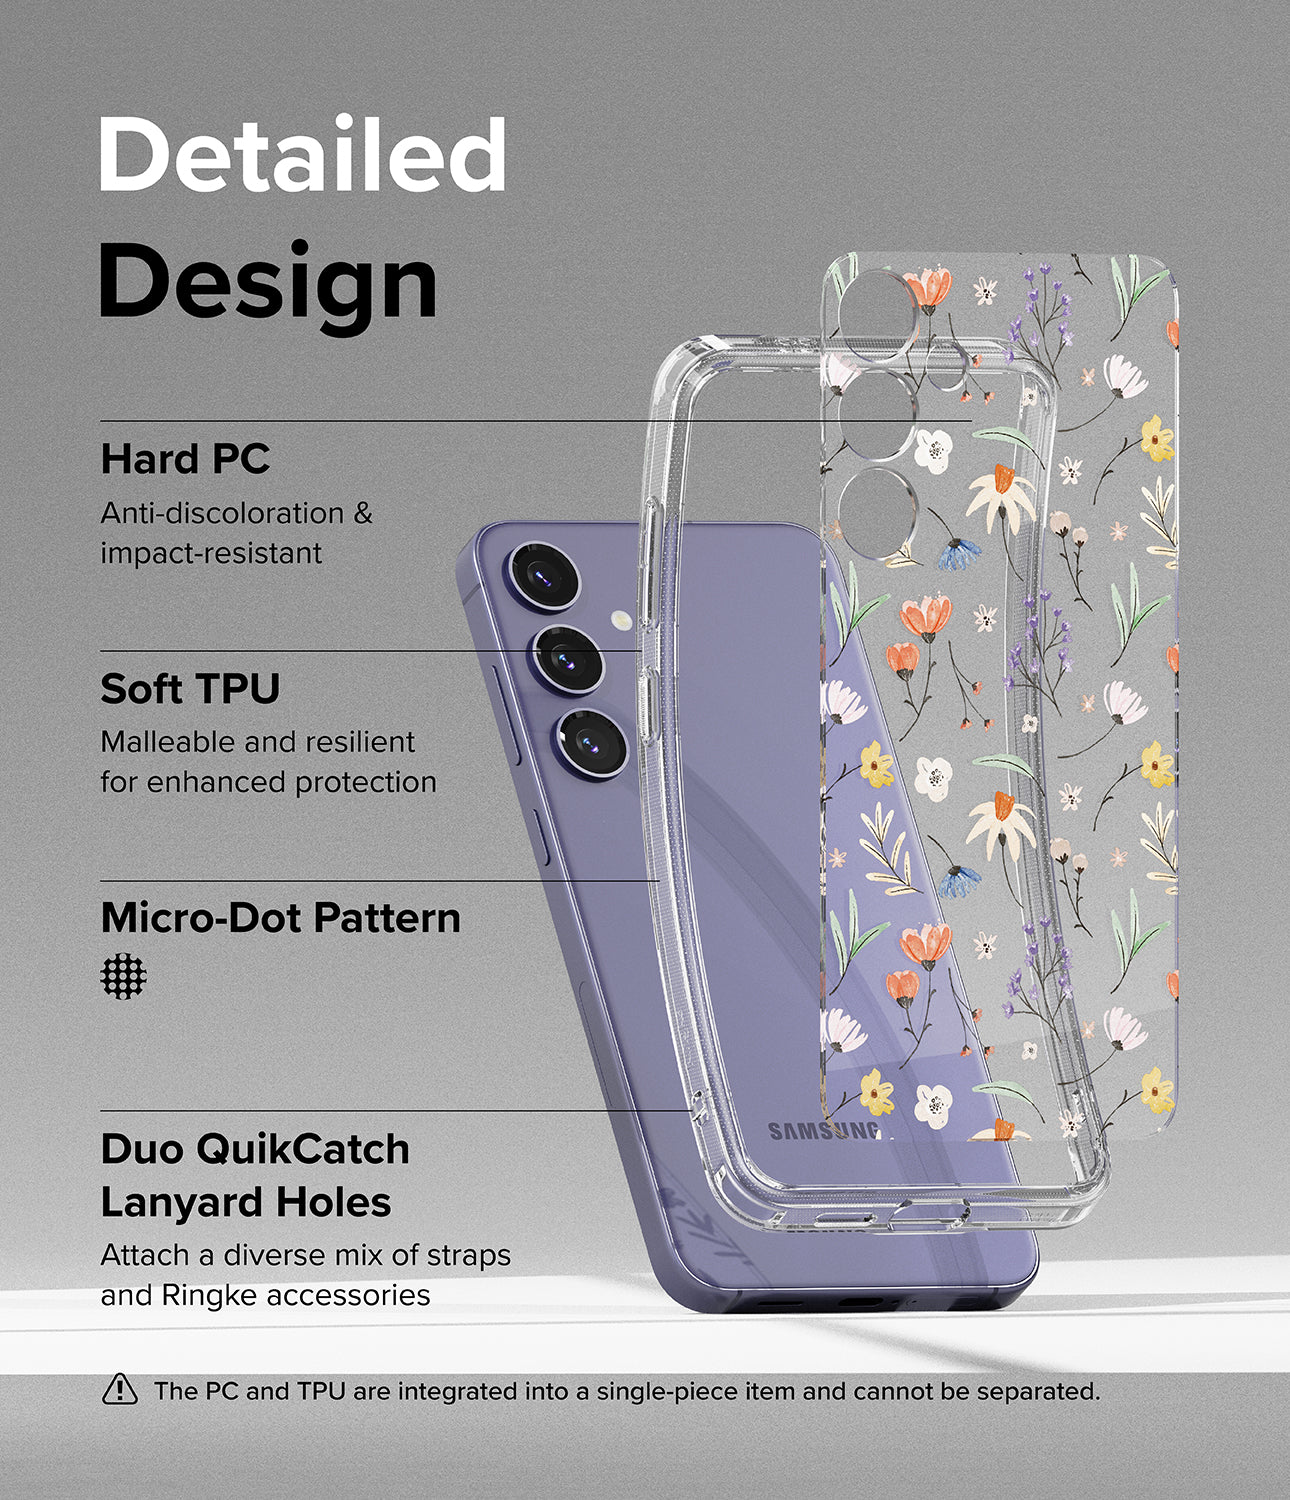 Galaxy S24 Case | Fusion Design - Detailed Design. Anti-discoloration and impact-resistant with Hard PC. Malleable and resilient for enhanced protection with Soft TPU. Micro-Dot Pattern. Duo QuikCatch Lanyard Holes to attach a diverse mix of straps and Ringke accessories